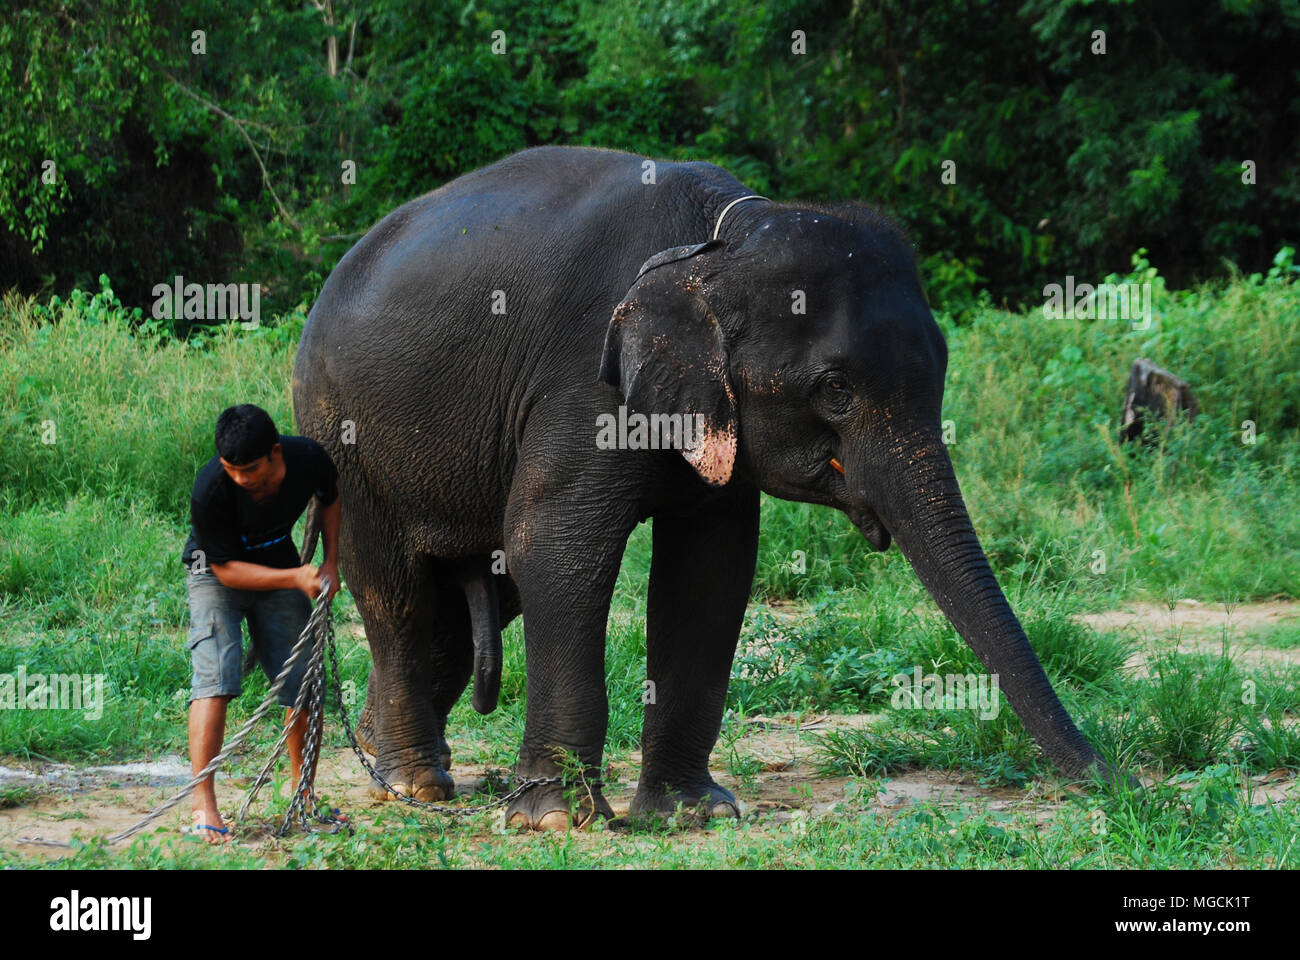 Kanchanaburi, THAILAND - 3 Oct2009: Daily elephant life at the conservation center, mahout playing and training elephant in the forest. Stock Photo